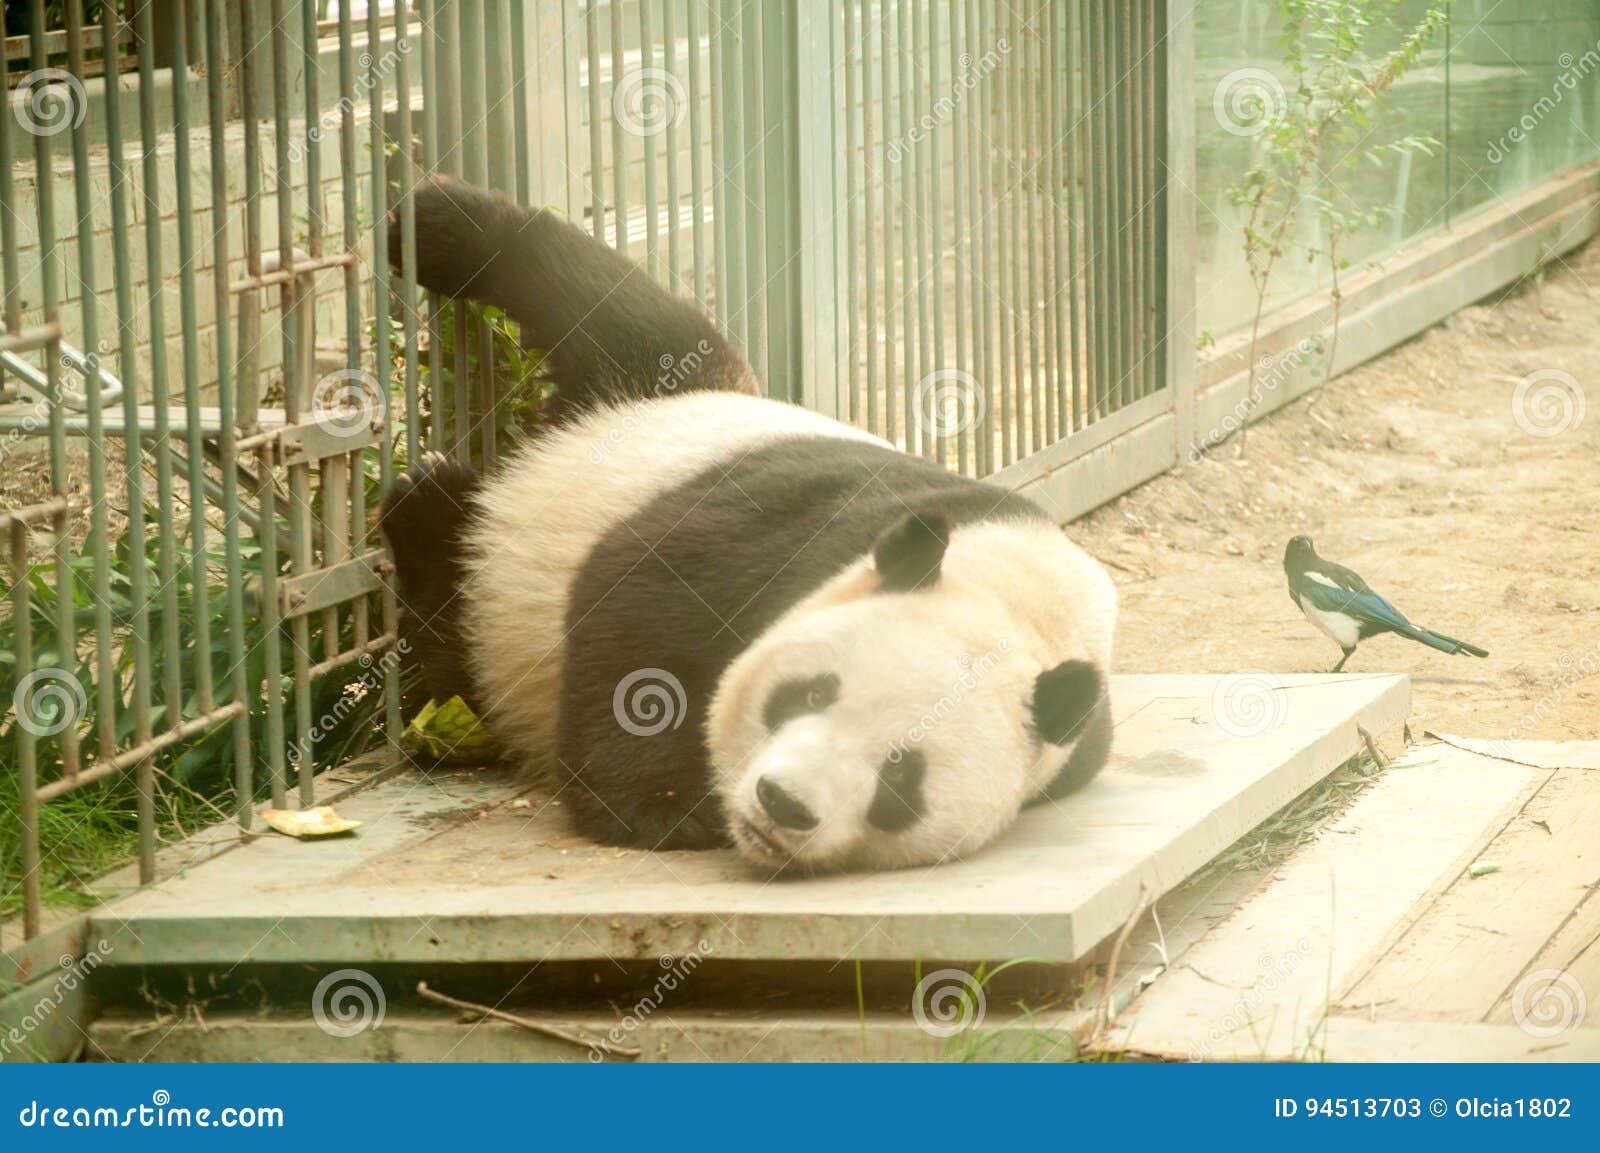 Animals in the Zoo in Beijing Stock Image - Image of white, bear: 94513703